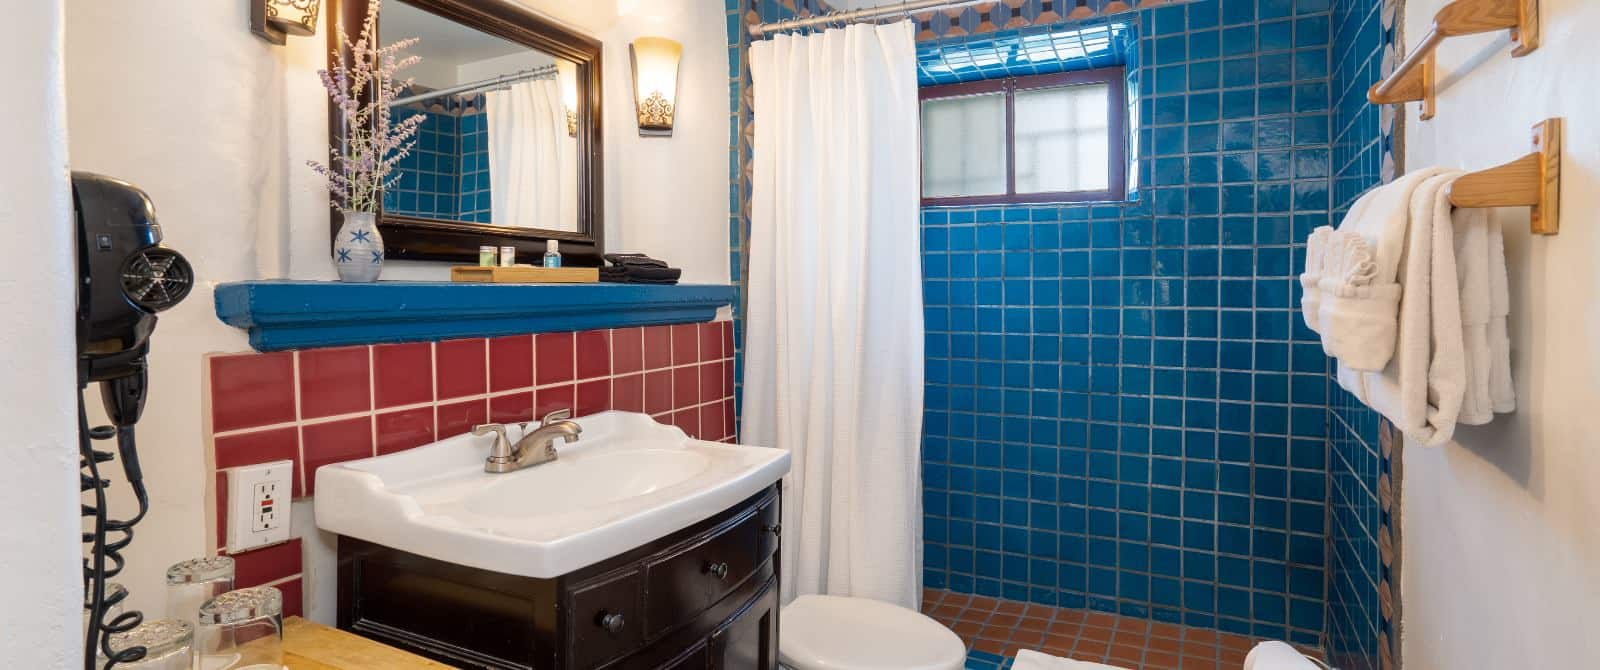 Bathroom with blue-tiled shower and red tile backsplash over the sink vanity with white shower curtain and towels.